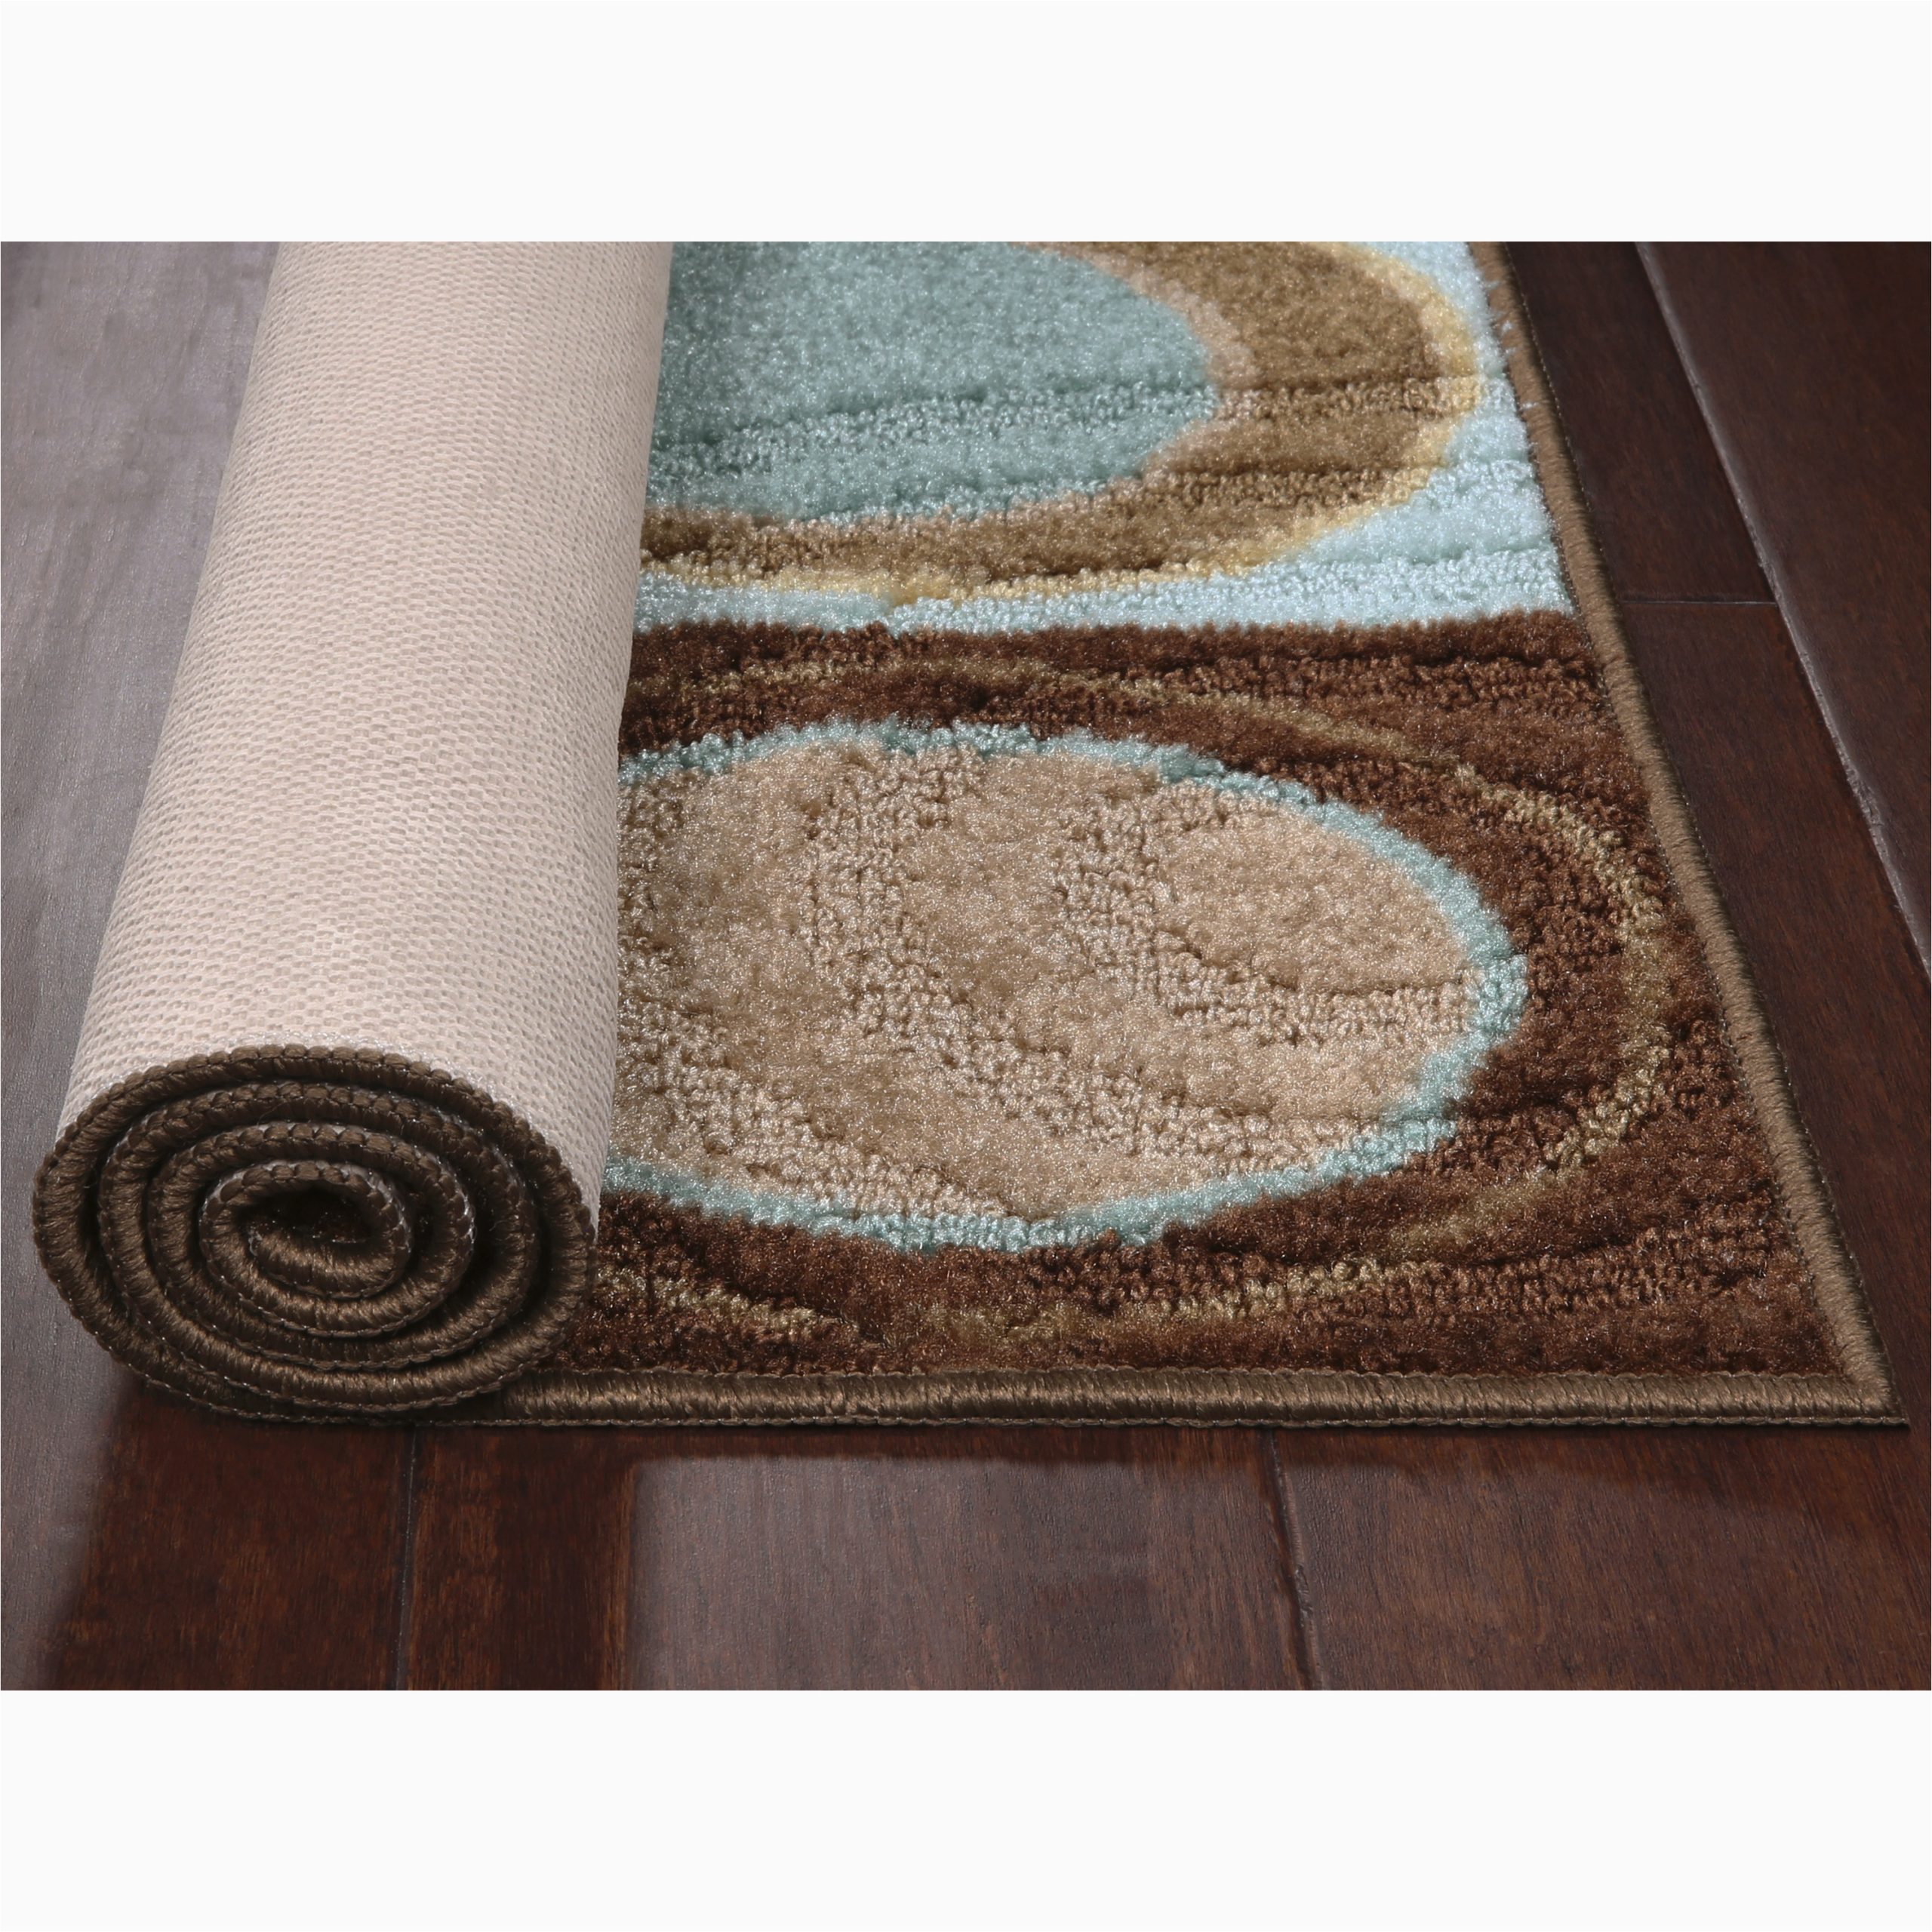 Better Homes and Gardens Circle Block area Rugs Better Homes & Gardens Circle Block Textured Print area Rug or Runner, Blue/brown, 1’8″x2’10”